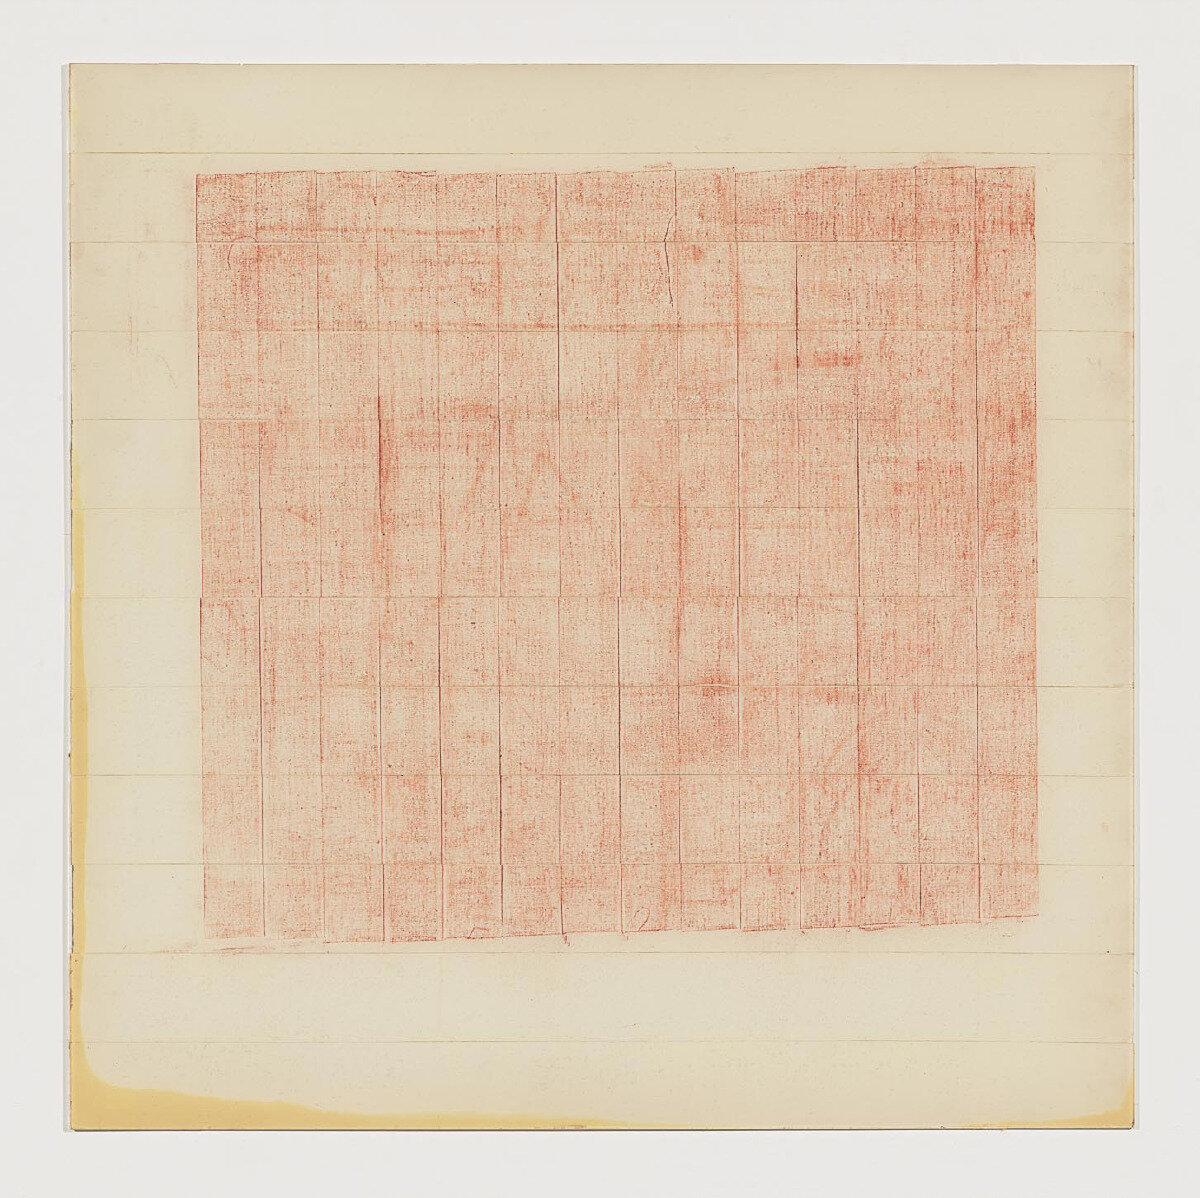  Untitled, c 1977, 36 x 36 inches, pastel and tape on Plexiglass 